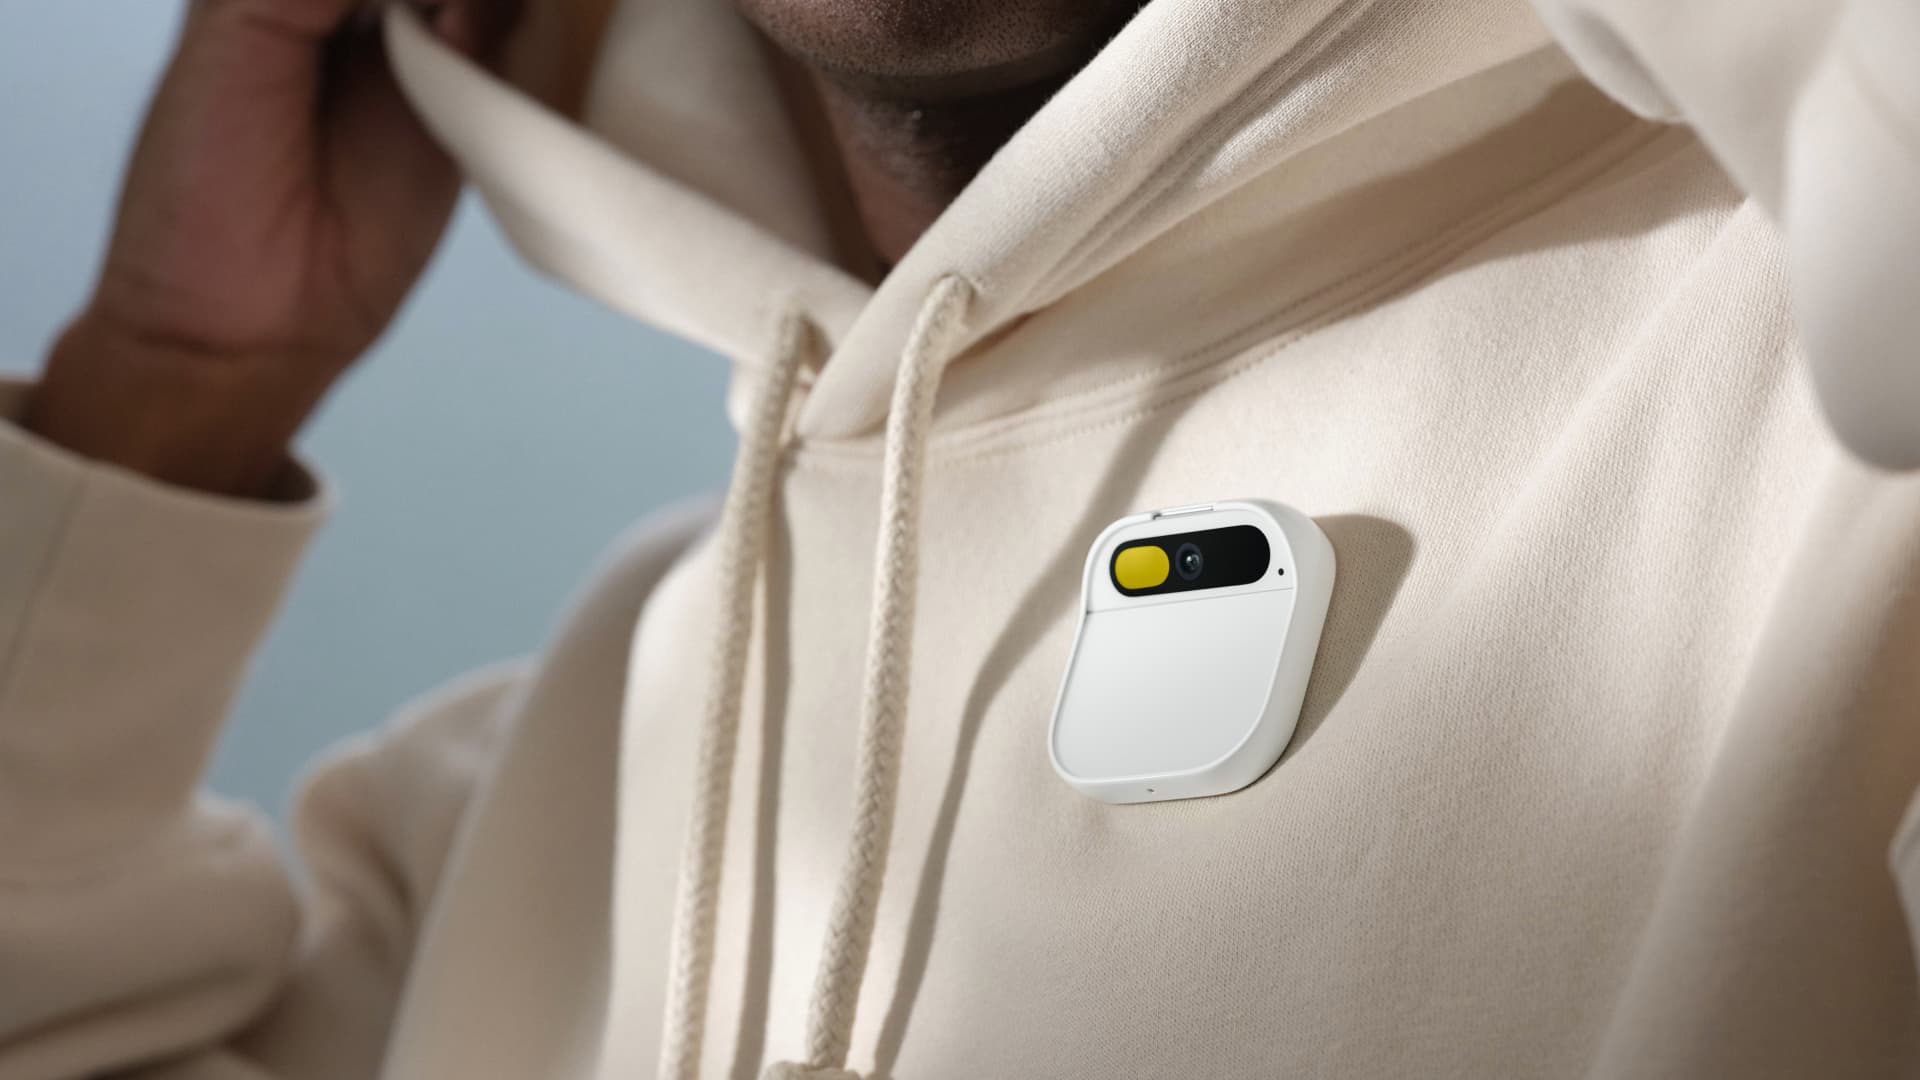 Former Apple designers launch 0 Humane AI Pin as smartphone replacement